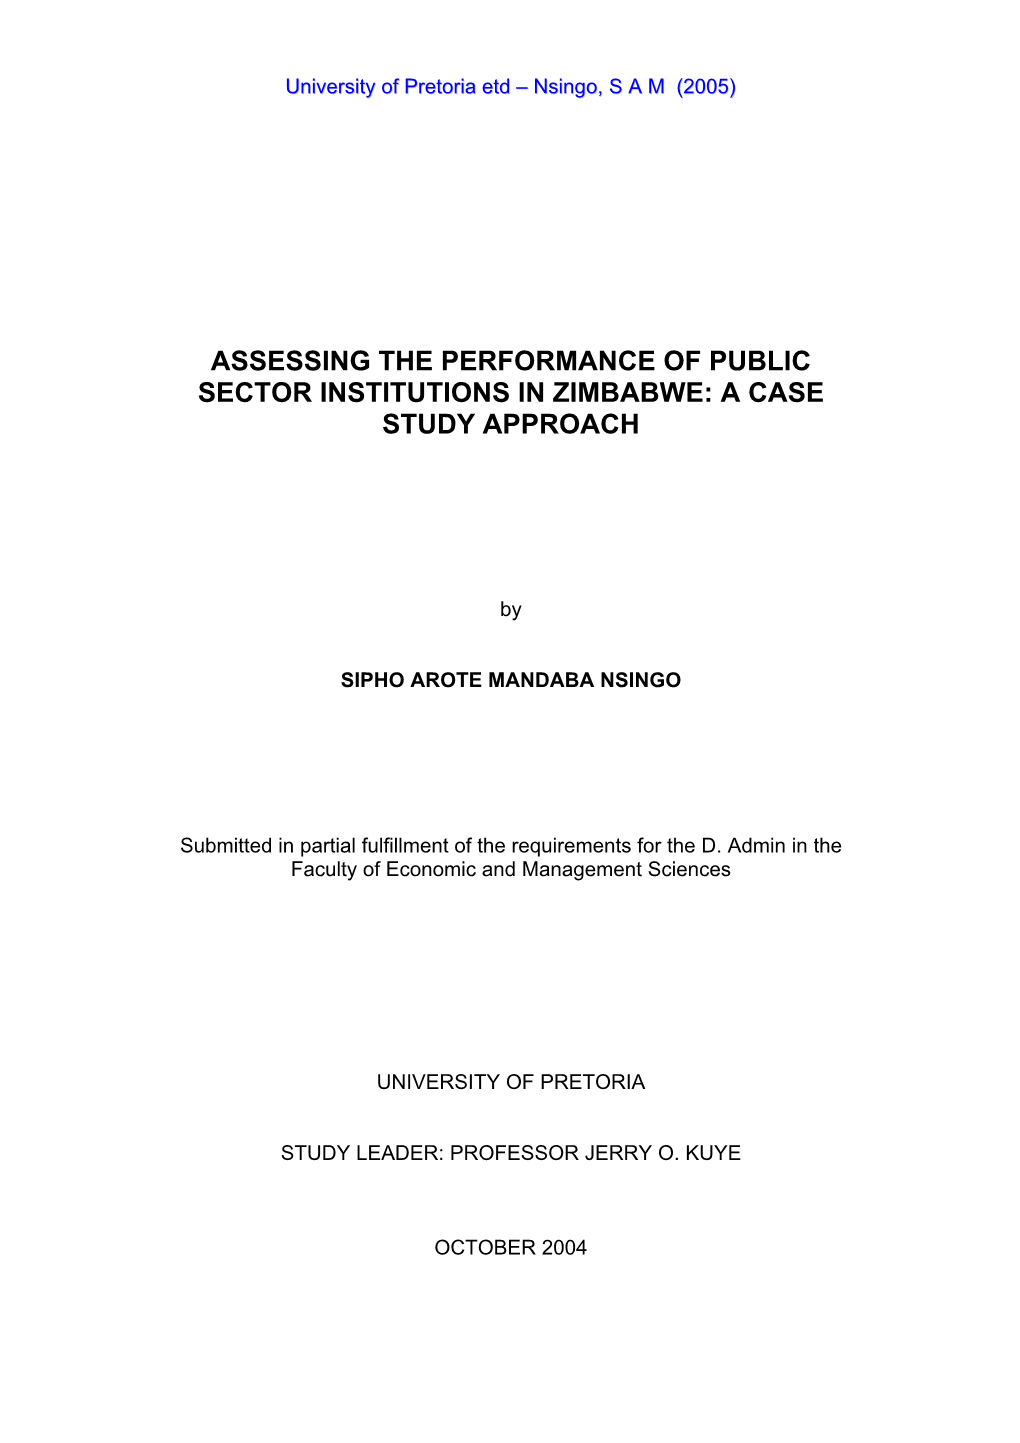 Assessing the Performance of Public Sector Institutions in Zimbabwe: a Case Study Approach